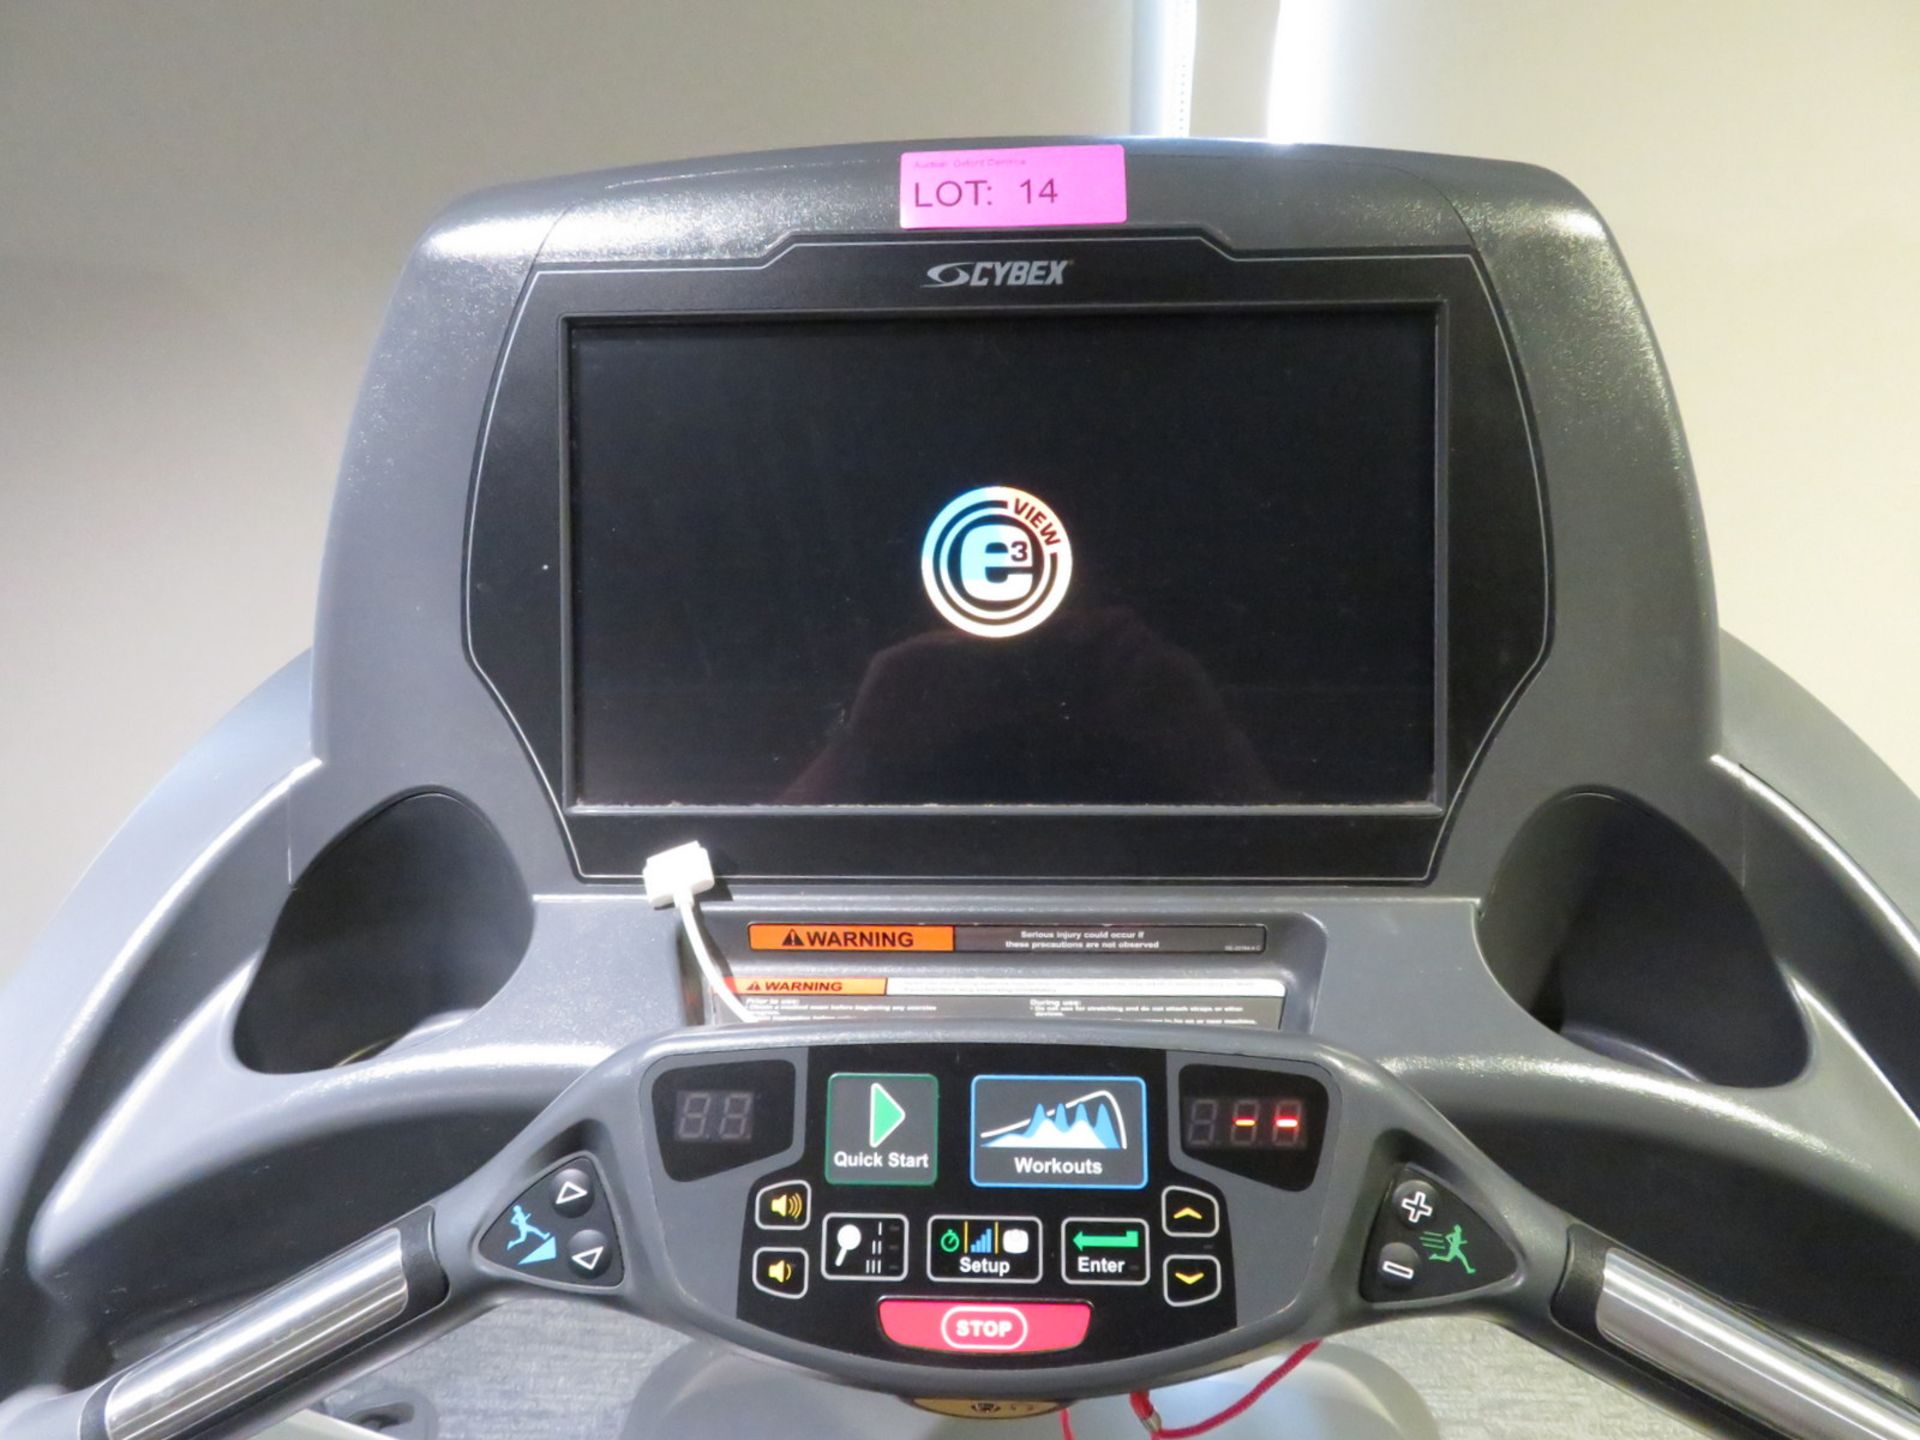 Cybex Treadmill Model: 625T, Working Condition With TV Display Monitor. - Image 6 of 9